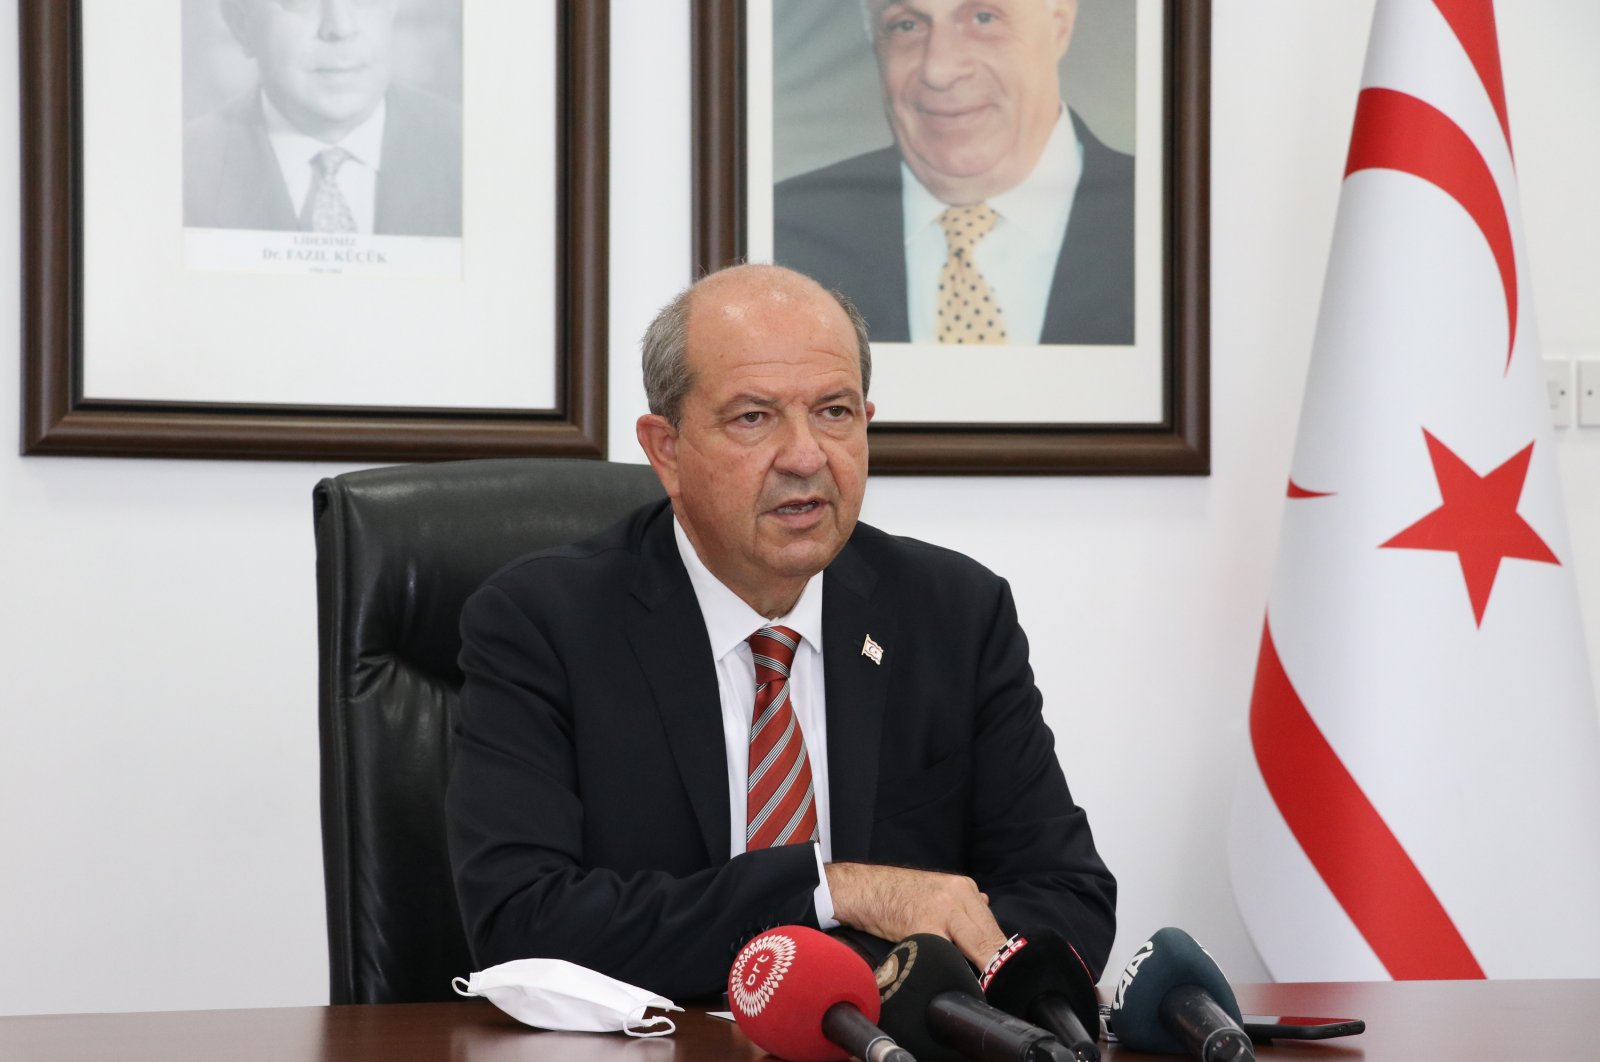 TRNC President Ersin Tatar speaks at a news conference in Ercan Airport, Lefkoşa, Turkish Republic of Northern Cyprus, Sept. 8, 2021. (AA Photo)